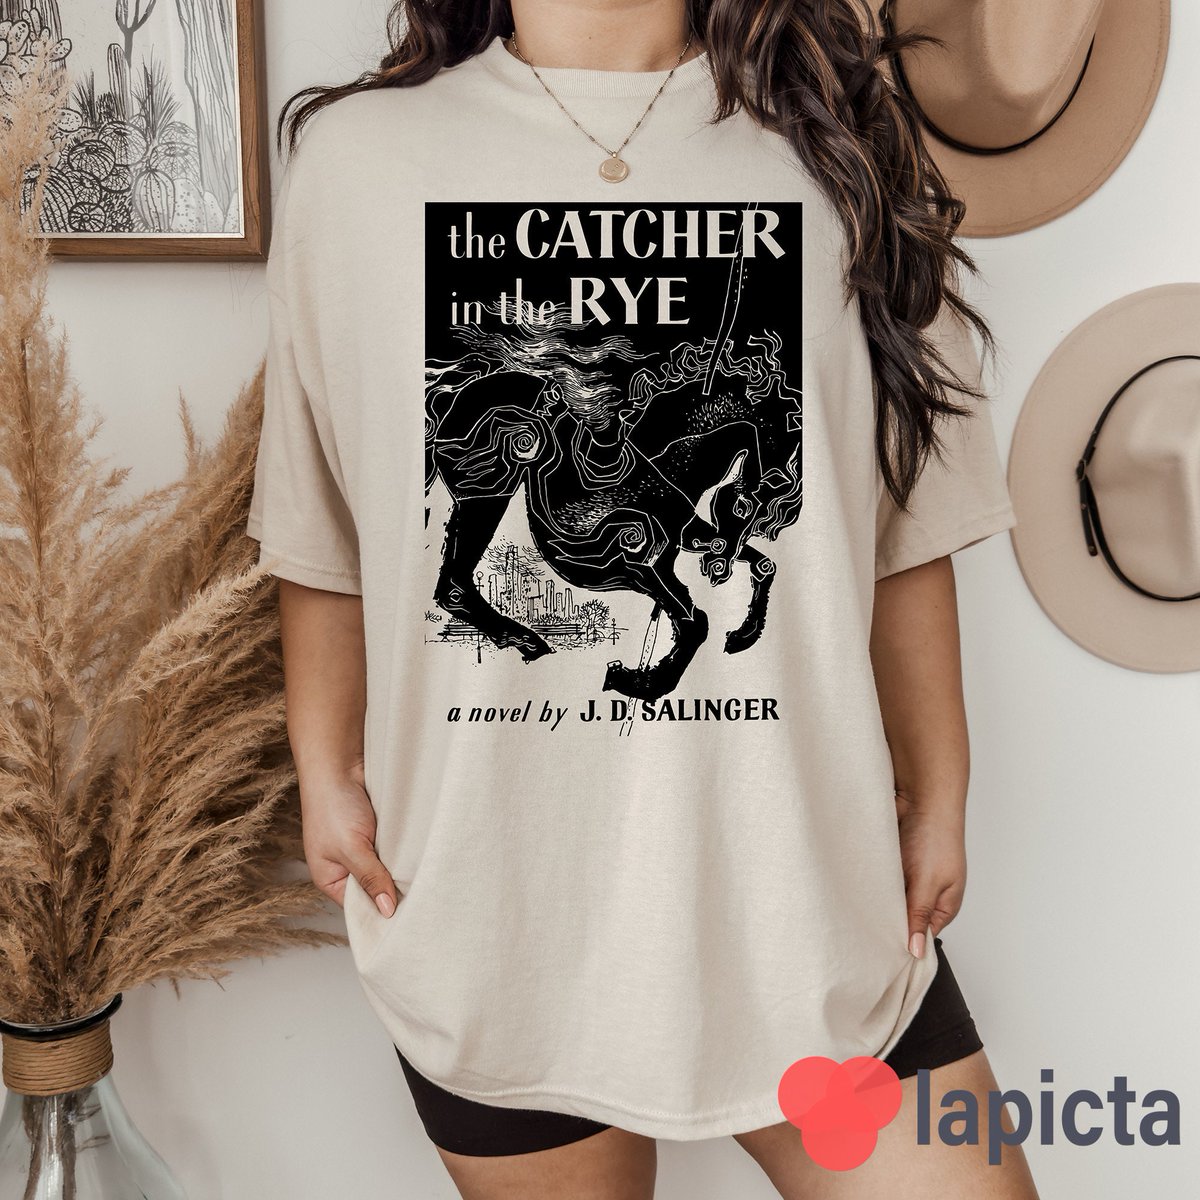 The Catcher In The Rye T shirt, Book Lover Shirt, J D Salinger Shirt

Order here: shirtbazaar.co/product/the-ca…

Tags: #TheCatcherInTheRyeTshirt #BookLoverShirt #JDSalingerShirt #TheCatcherInTheRyeTshirtcustomtshirts #TheCatcherInTheRyeTshirtcustomshirt